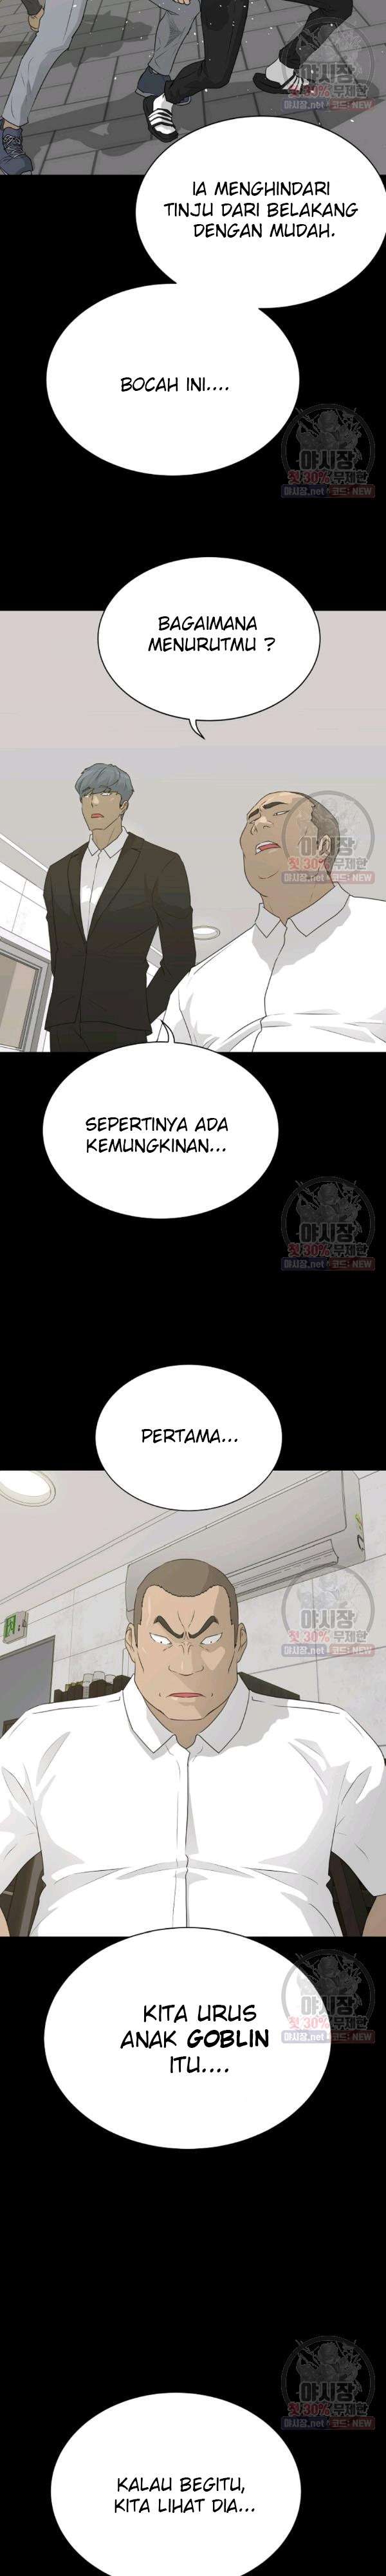 Trigger Chapter 68